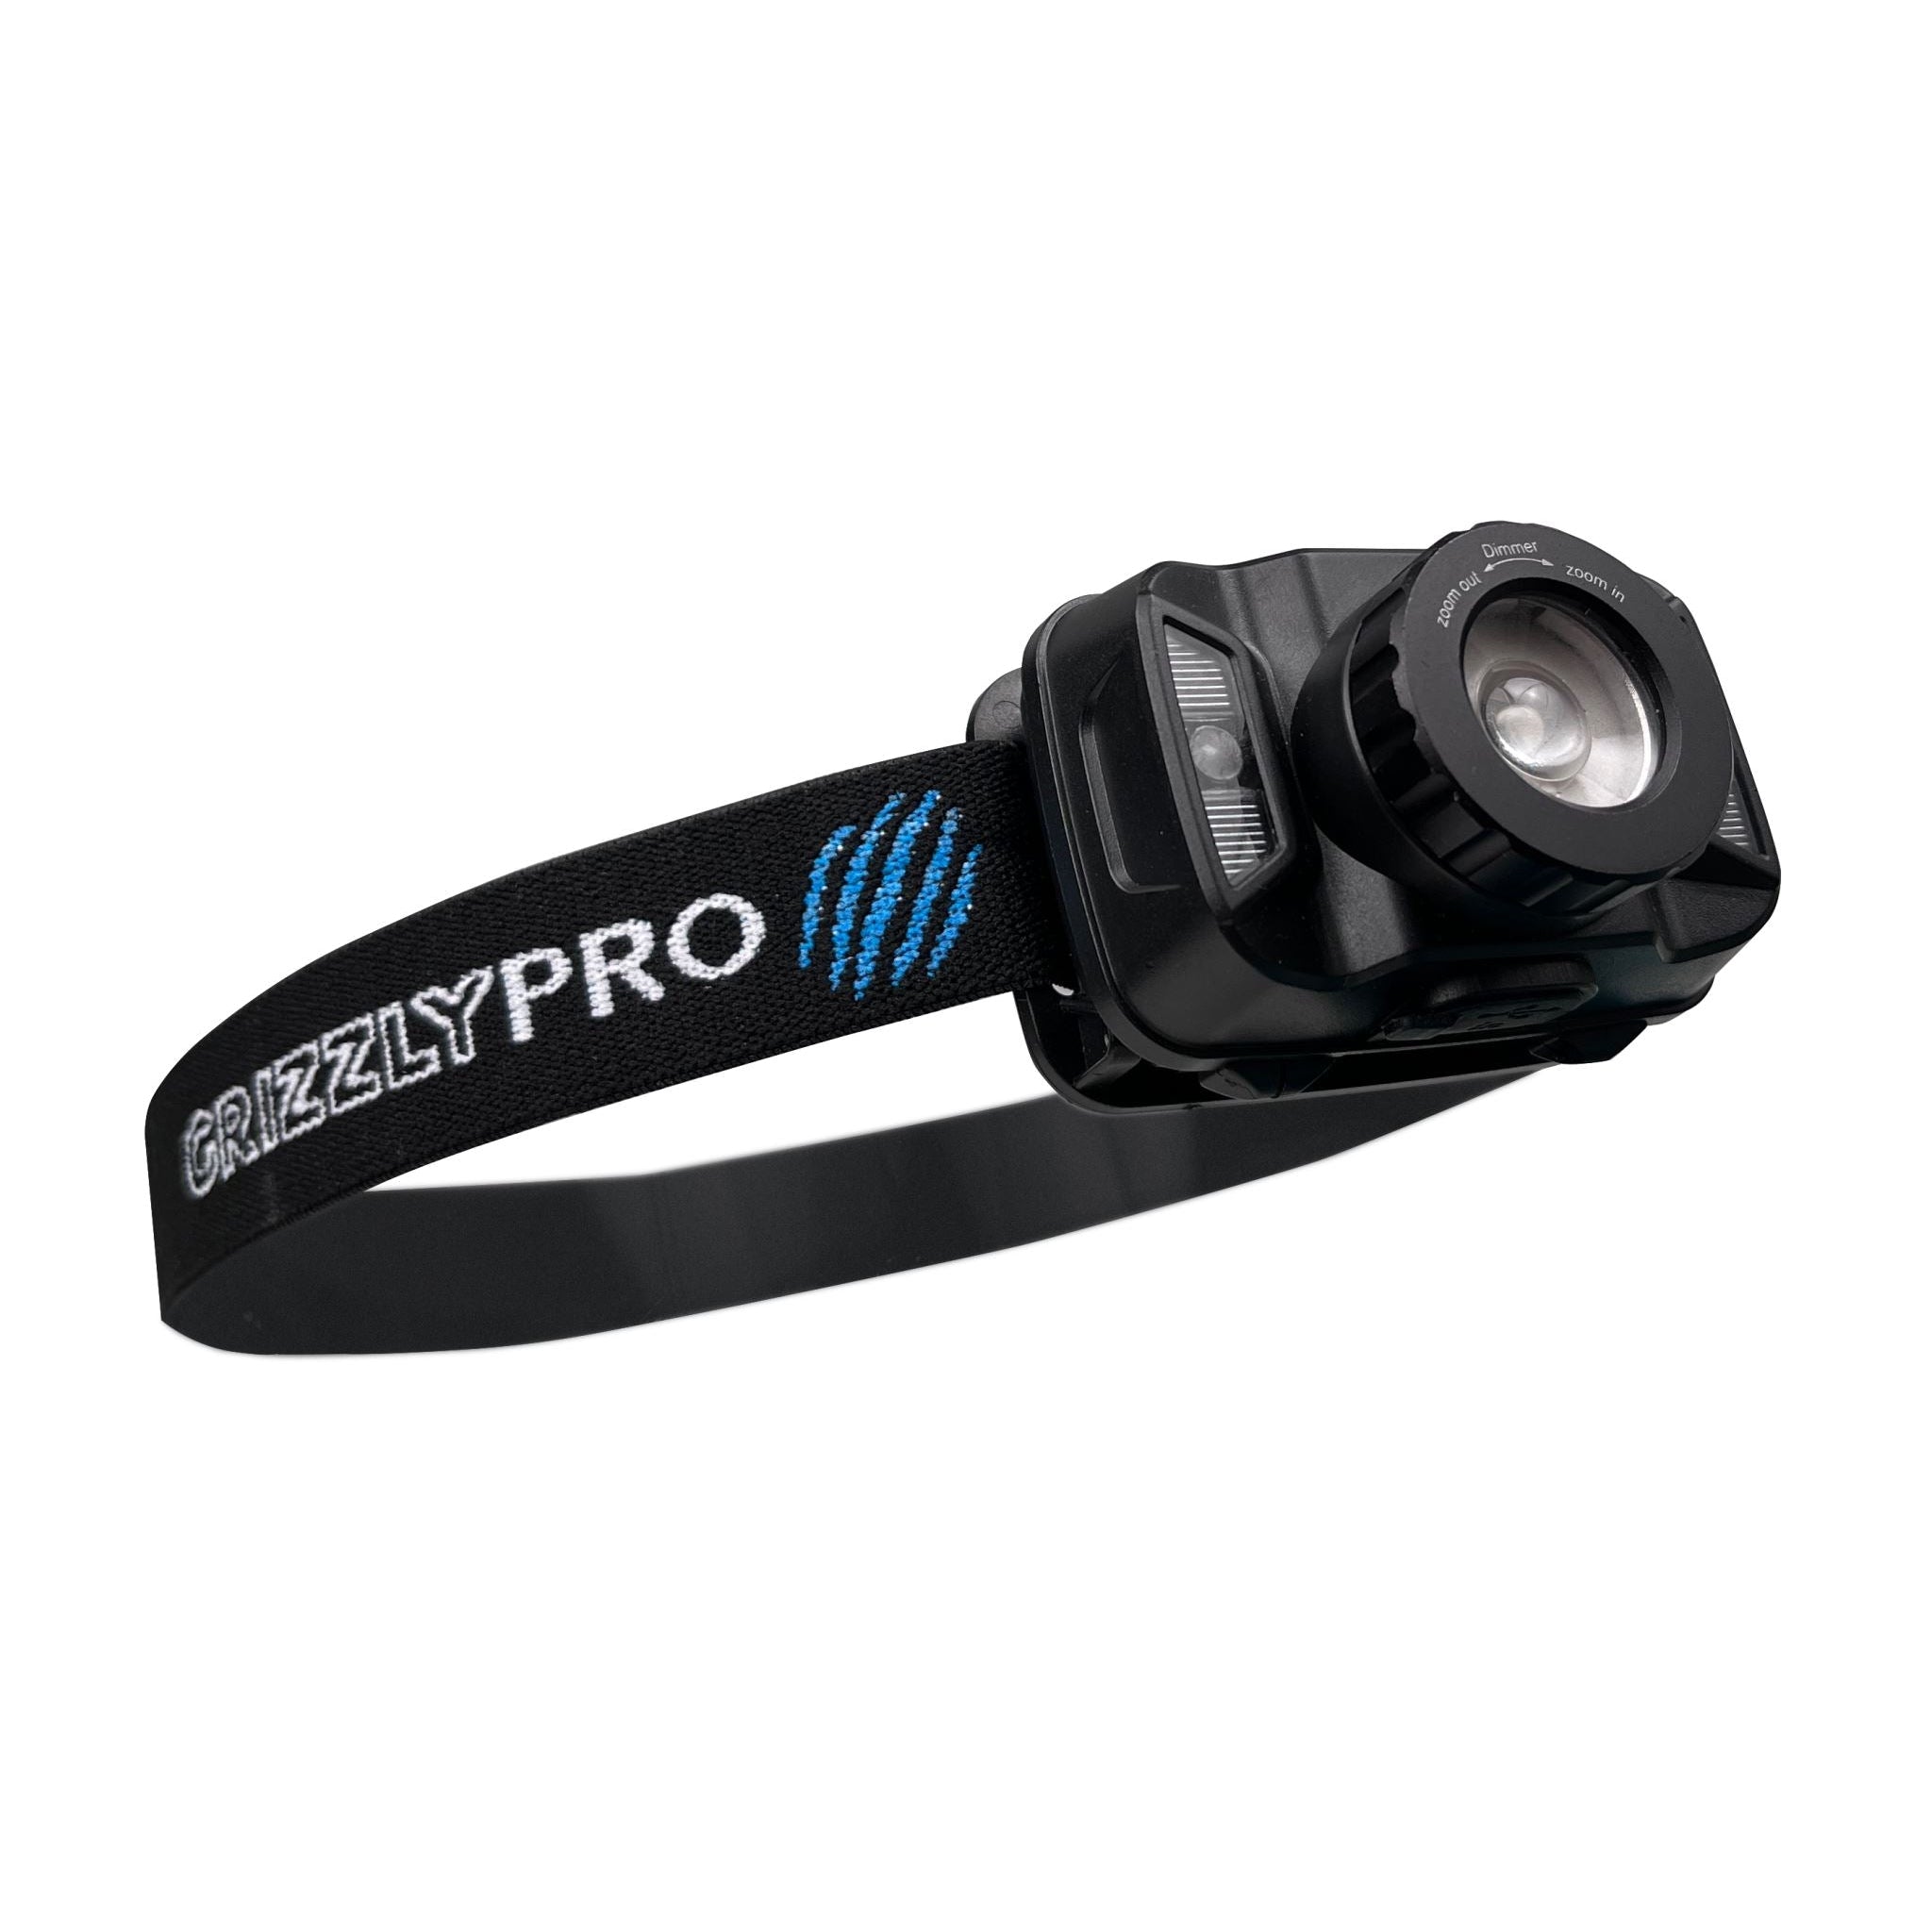 GrizzlyPRO 500 Lumen LED Rechargeable Head-Band Light Scorpion